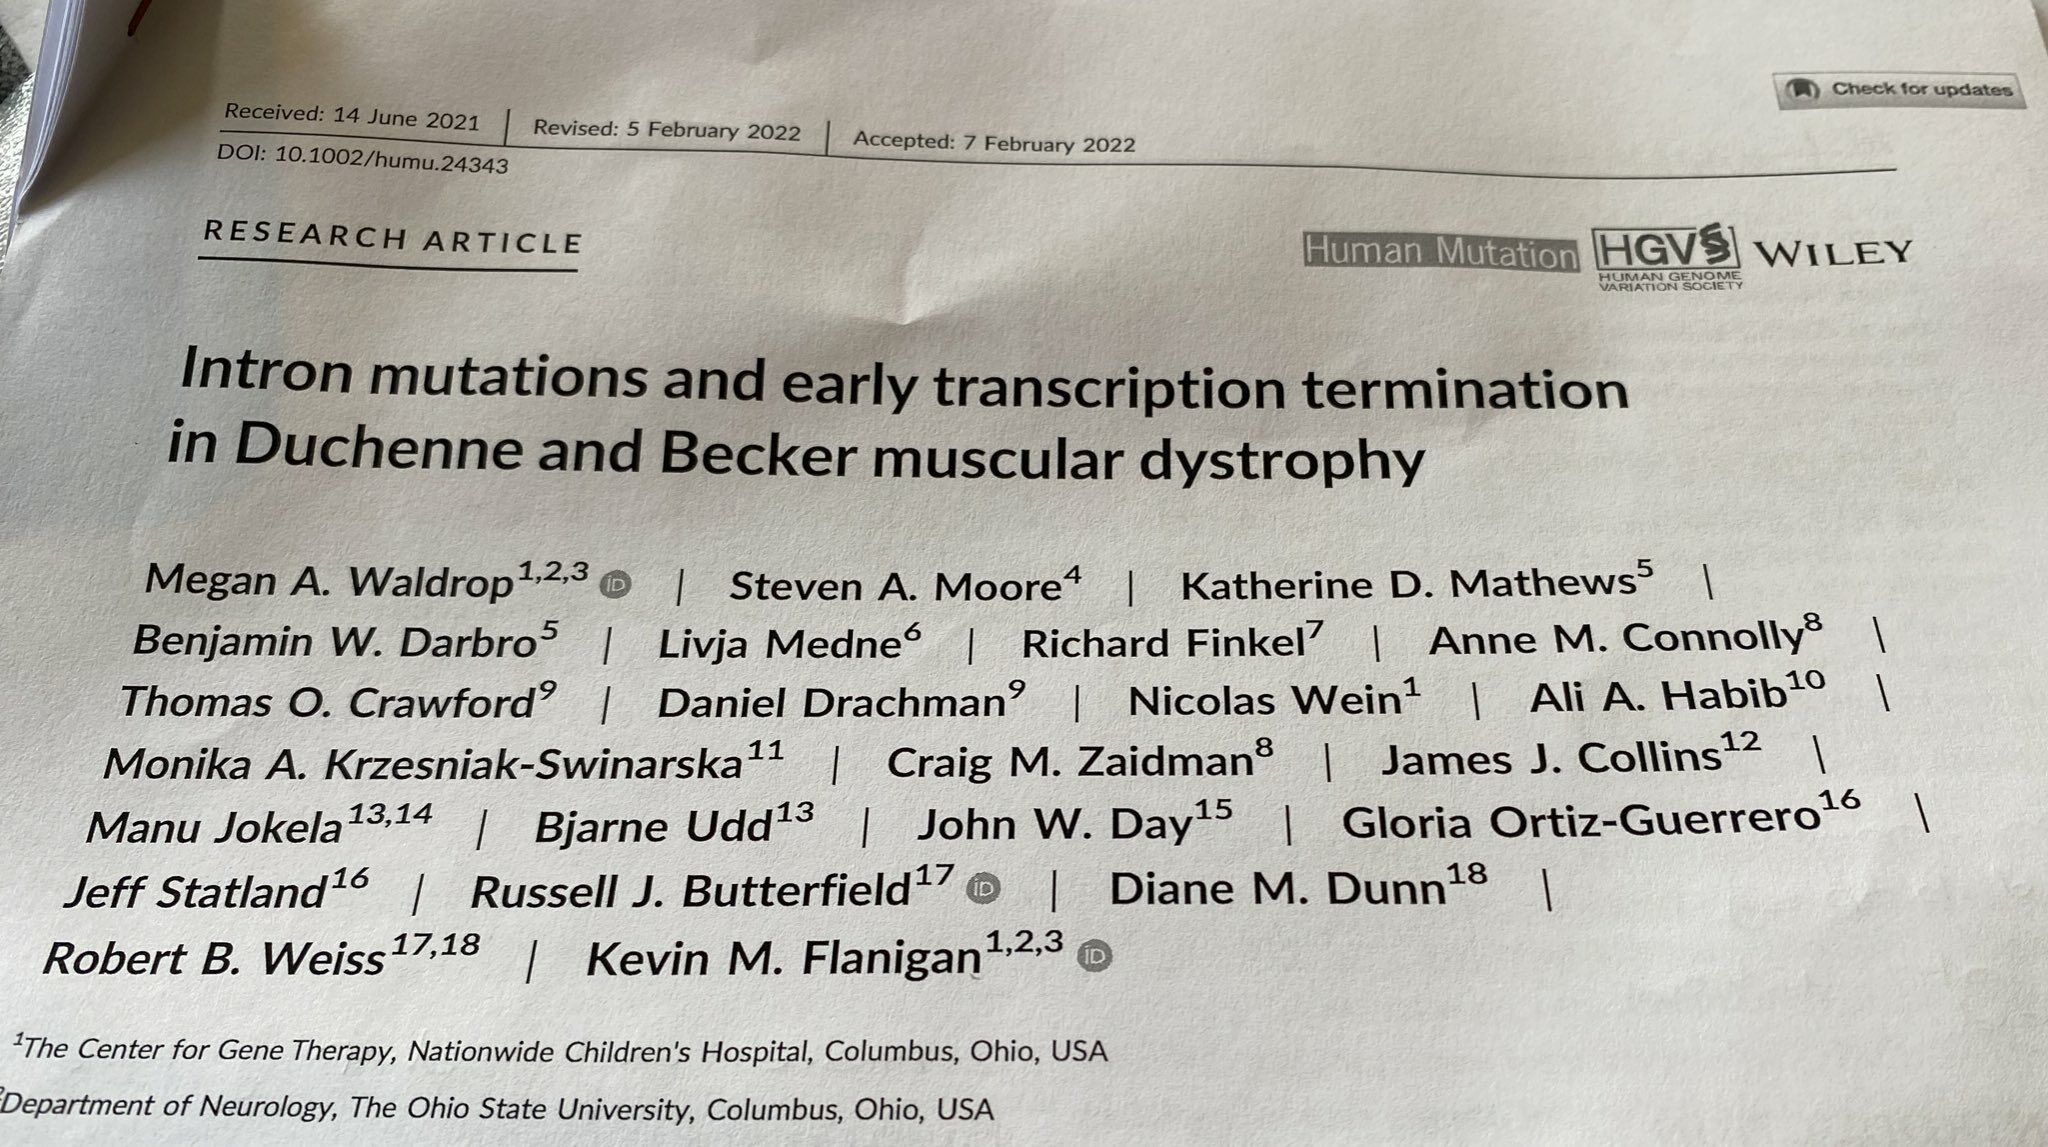 Intron mutations and early transcription termination in Duchenne and Becker muscular dystrophy